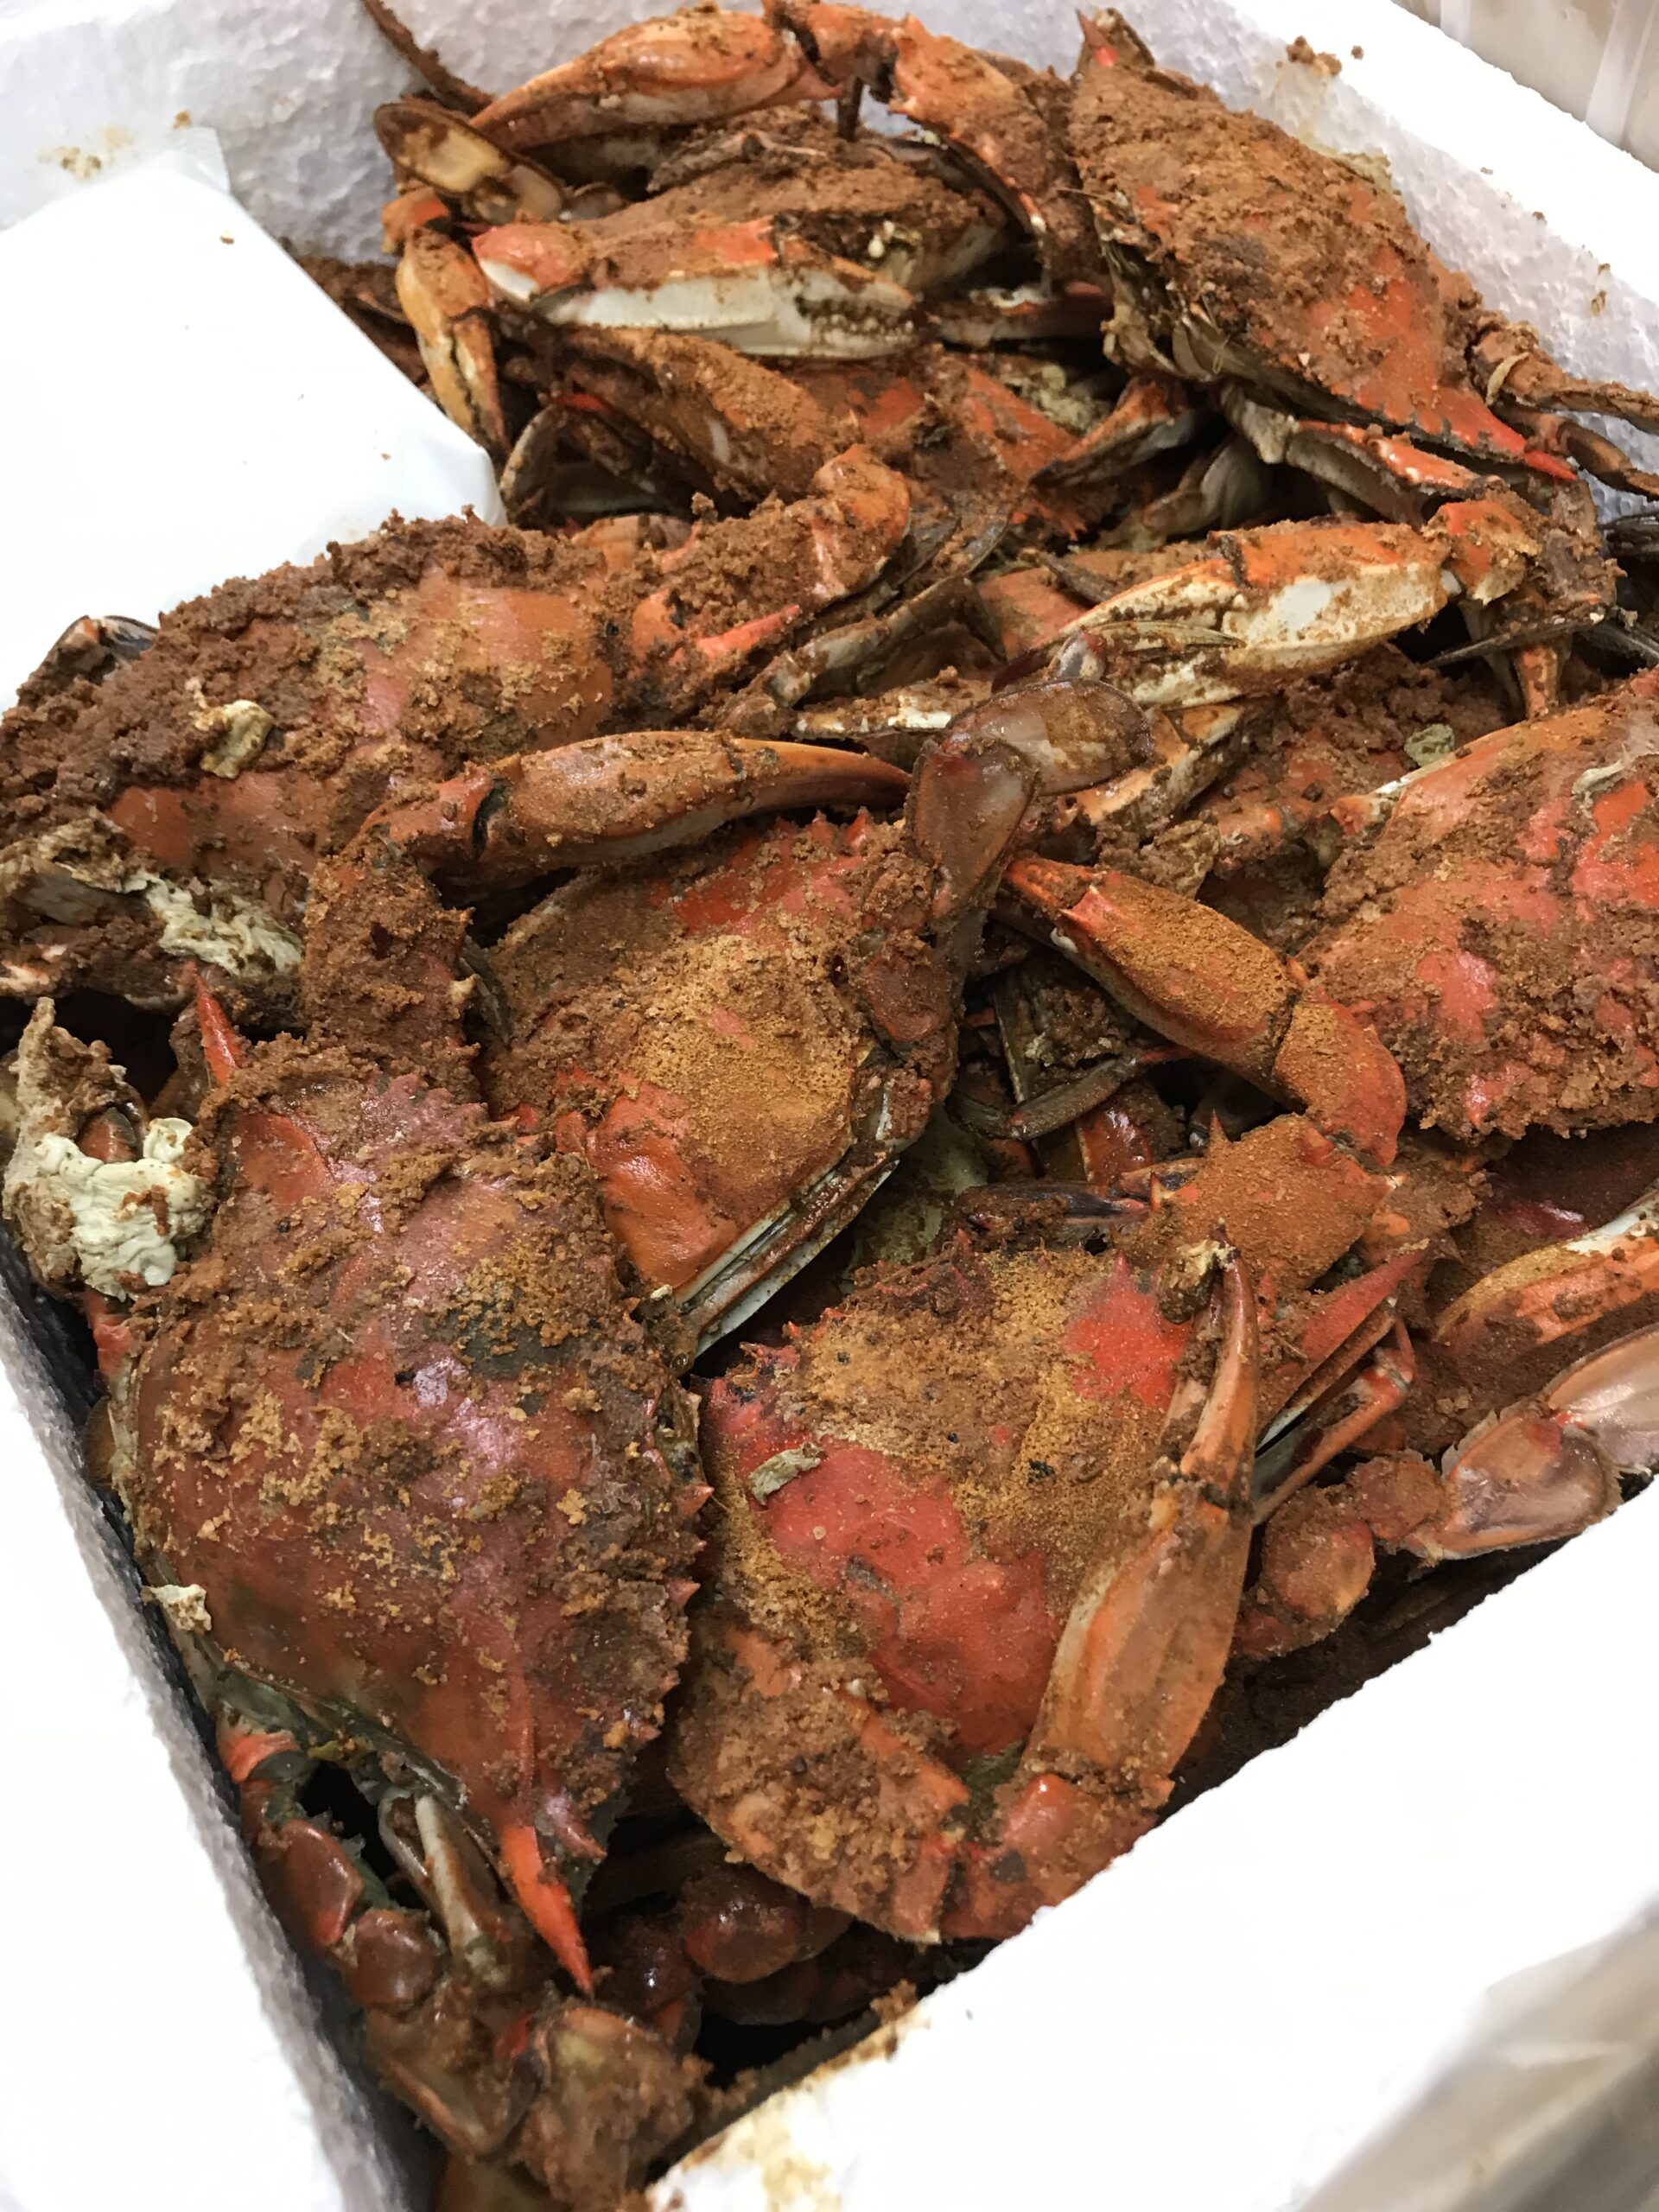 Southern Maryland Crabs and Seafood - 1/2 Bushel Mixed Sizes Females